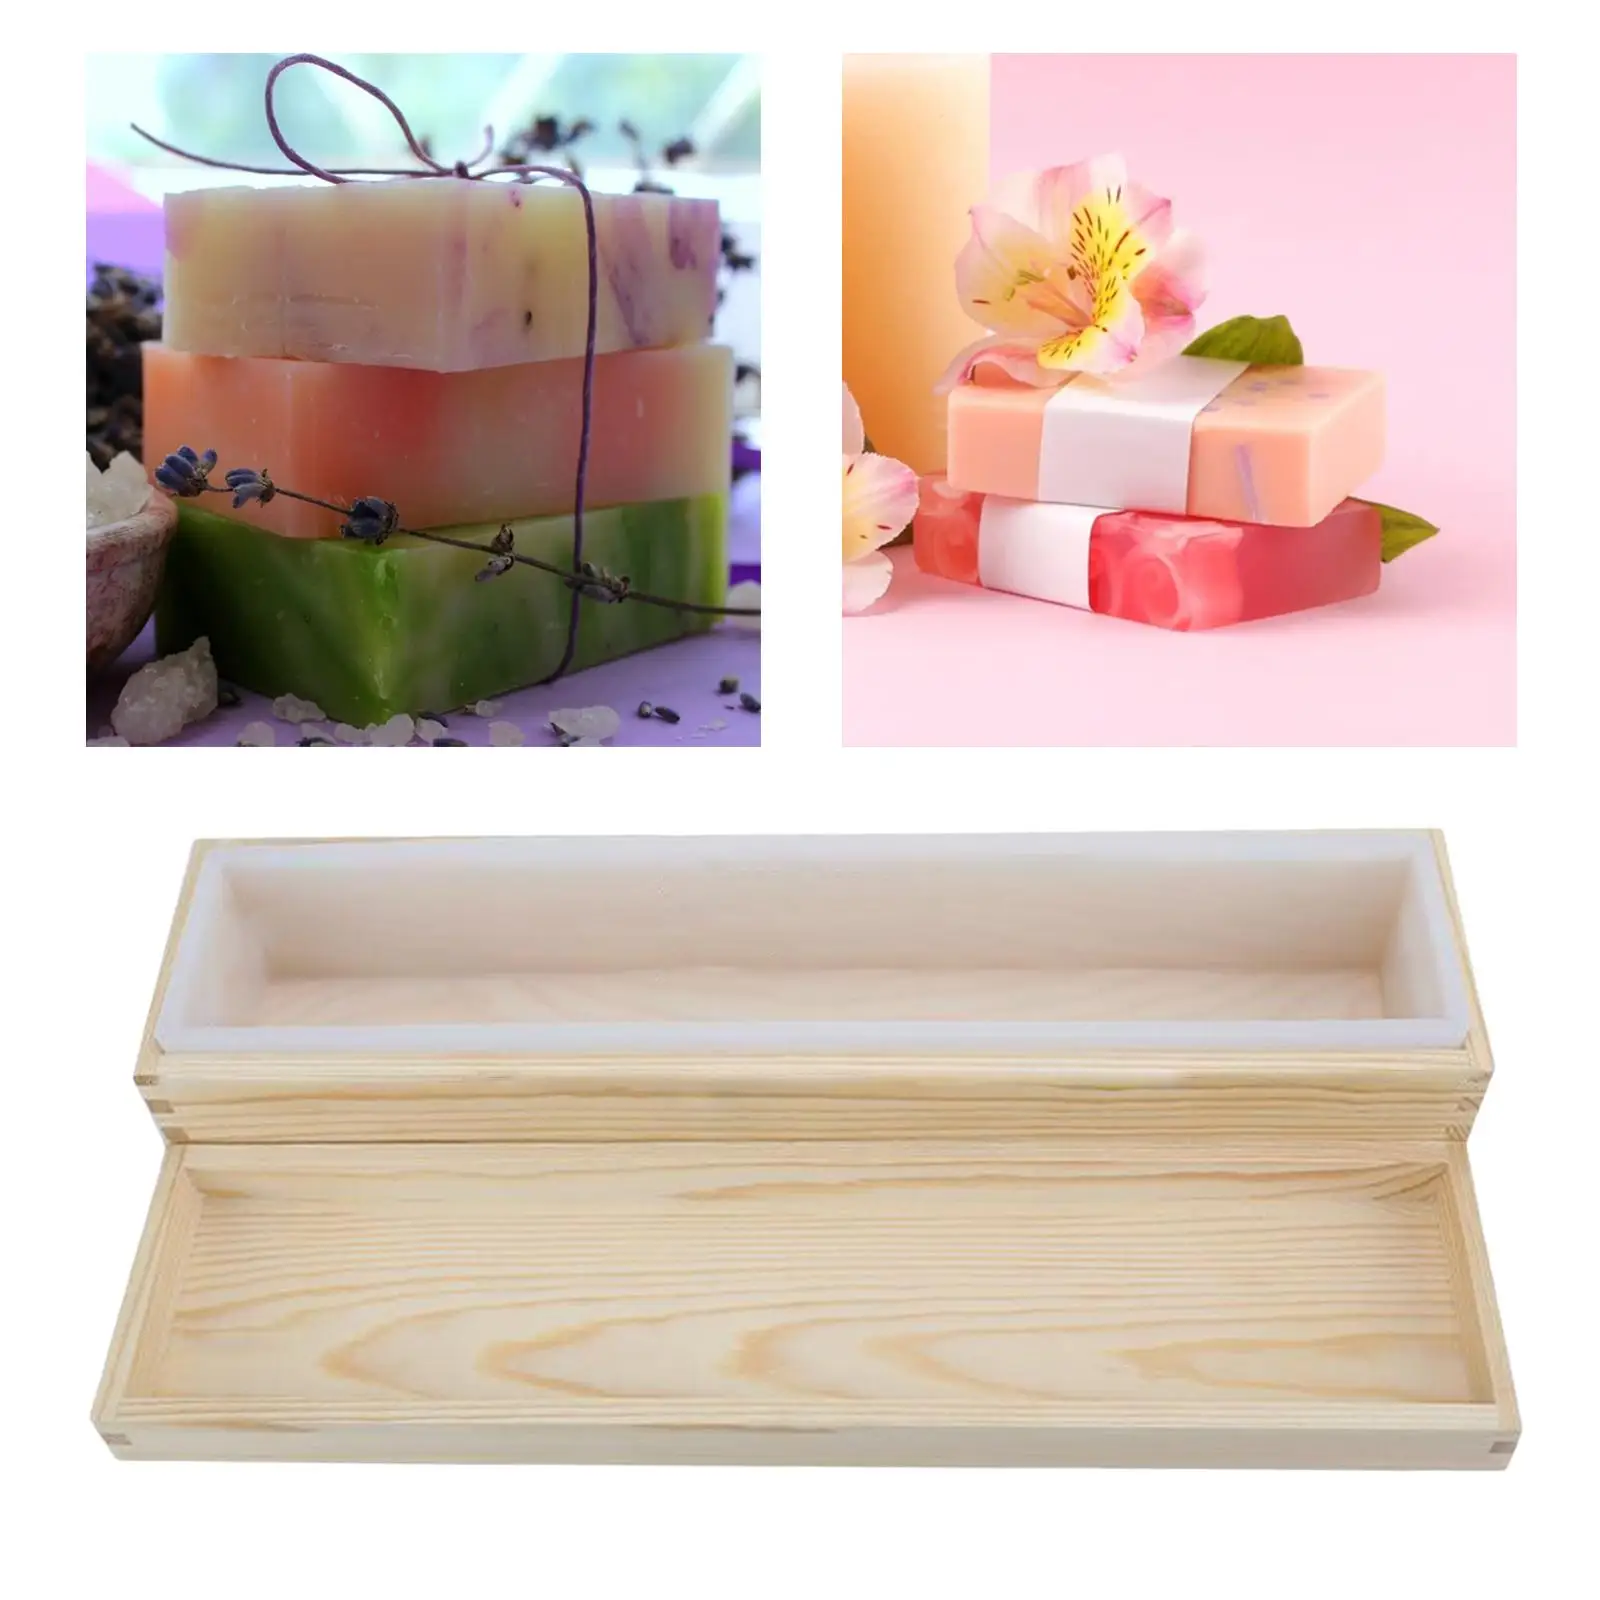 Soap Making Mould Silicone Resin Crafts Chocolate Loaf Mold DIY Homemade Soap Supplies Baking Pan Molds w/ Lid